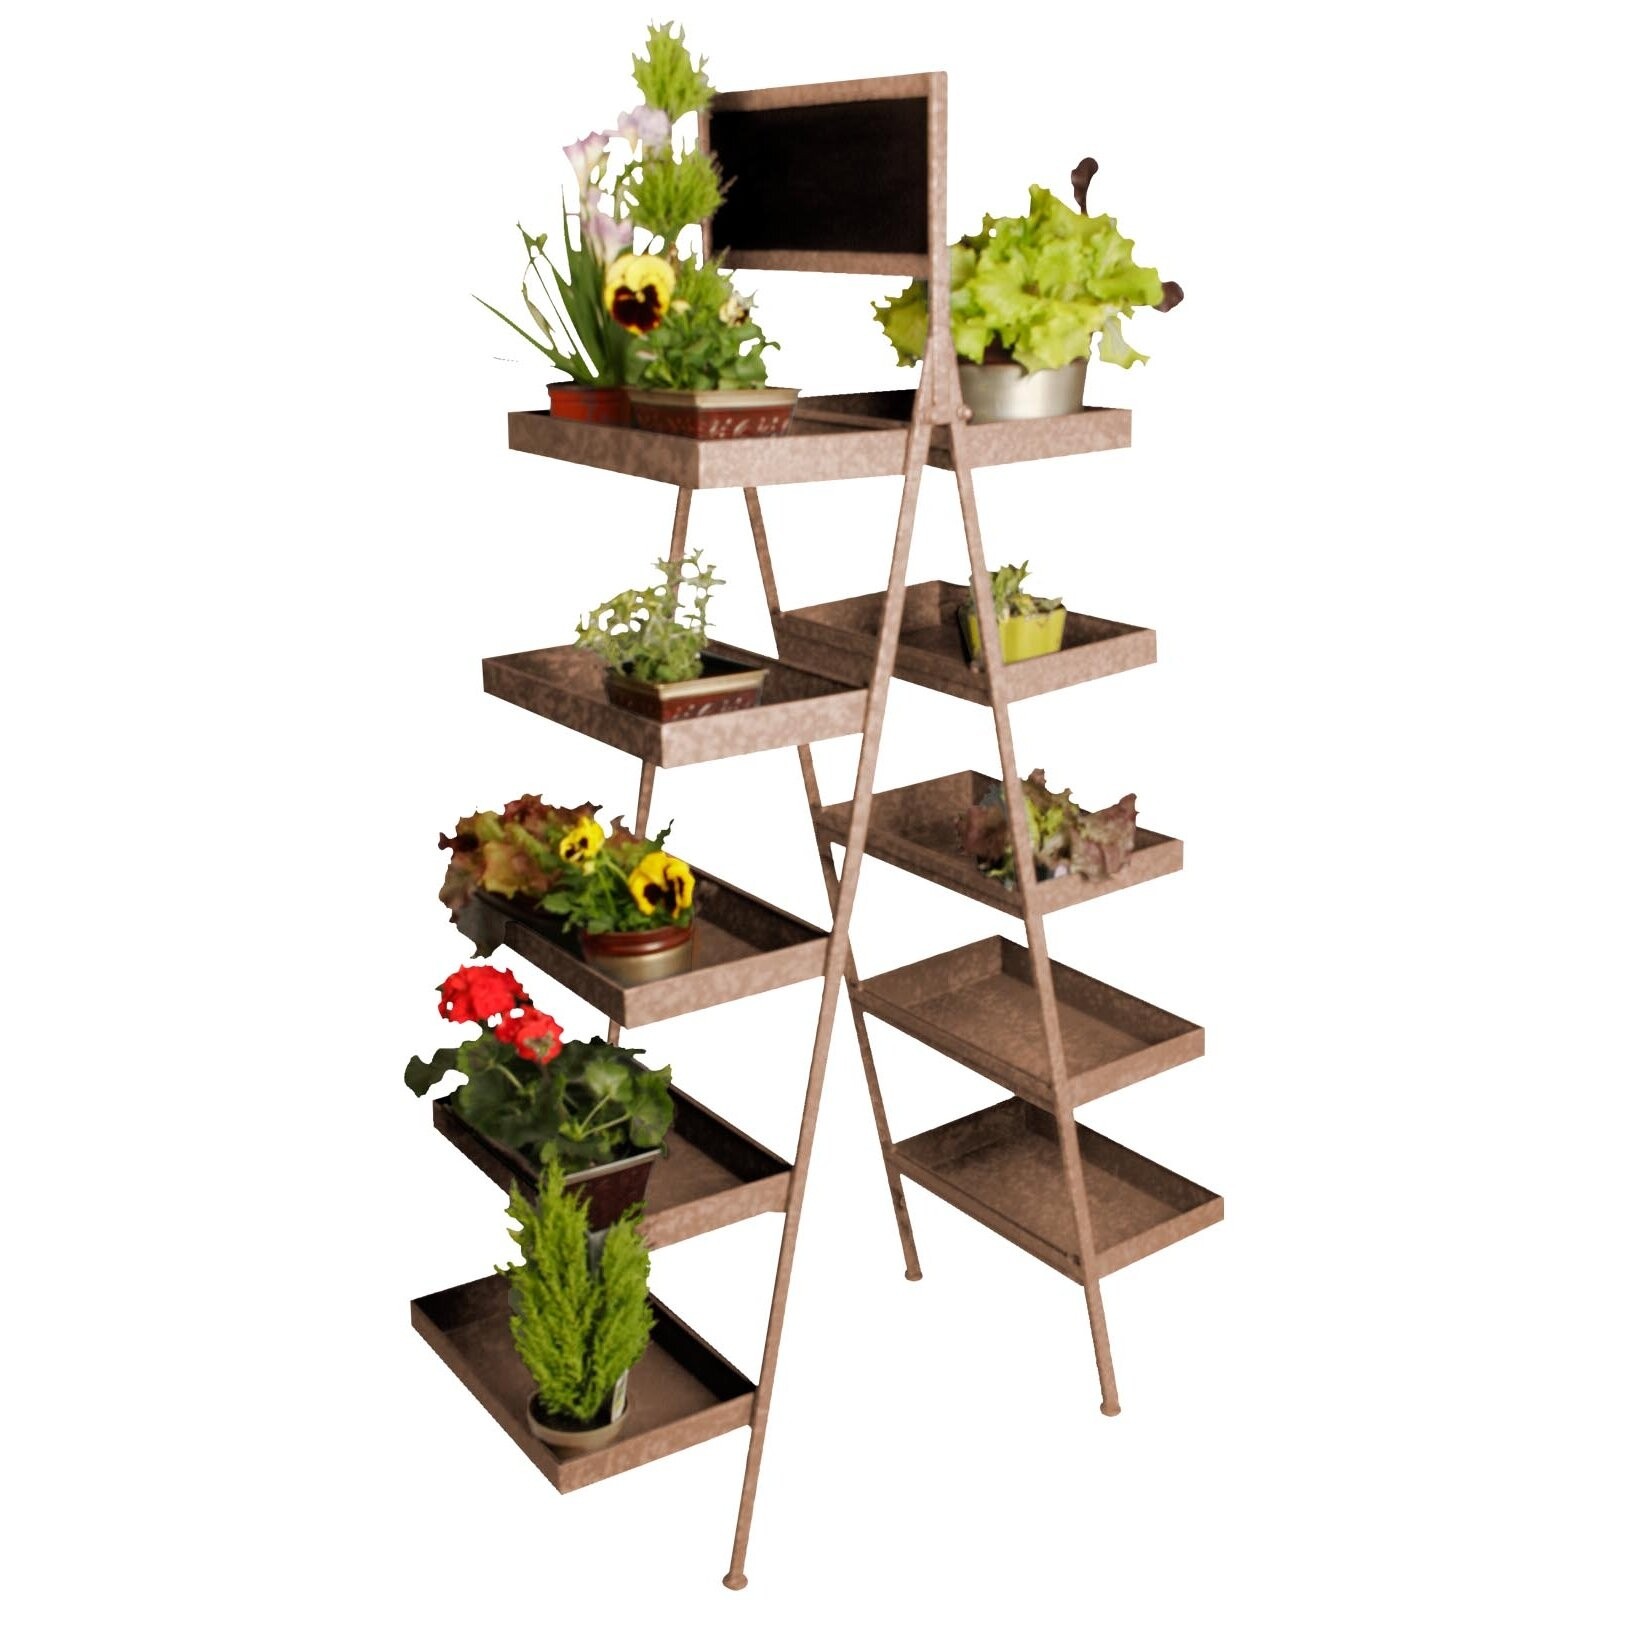 Waldimports chalkboard multi tiered plant stand reviews